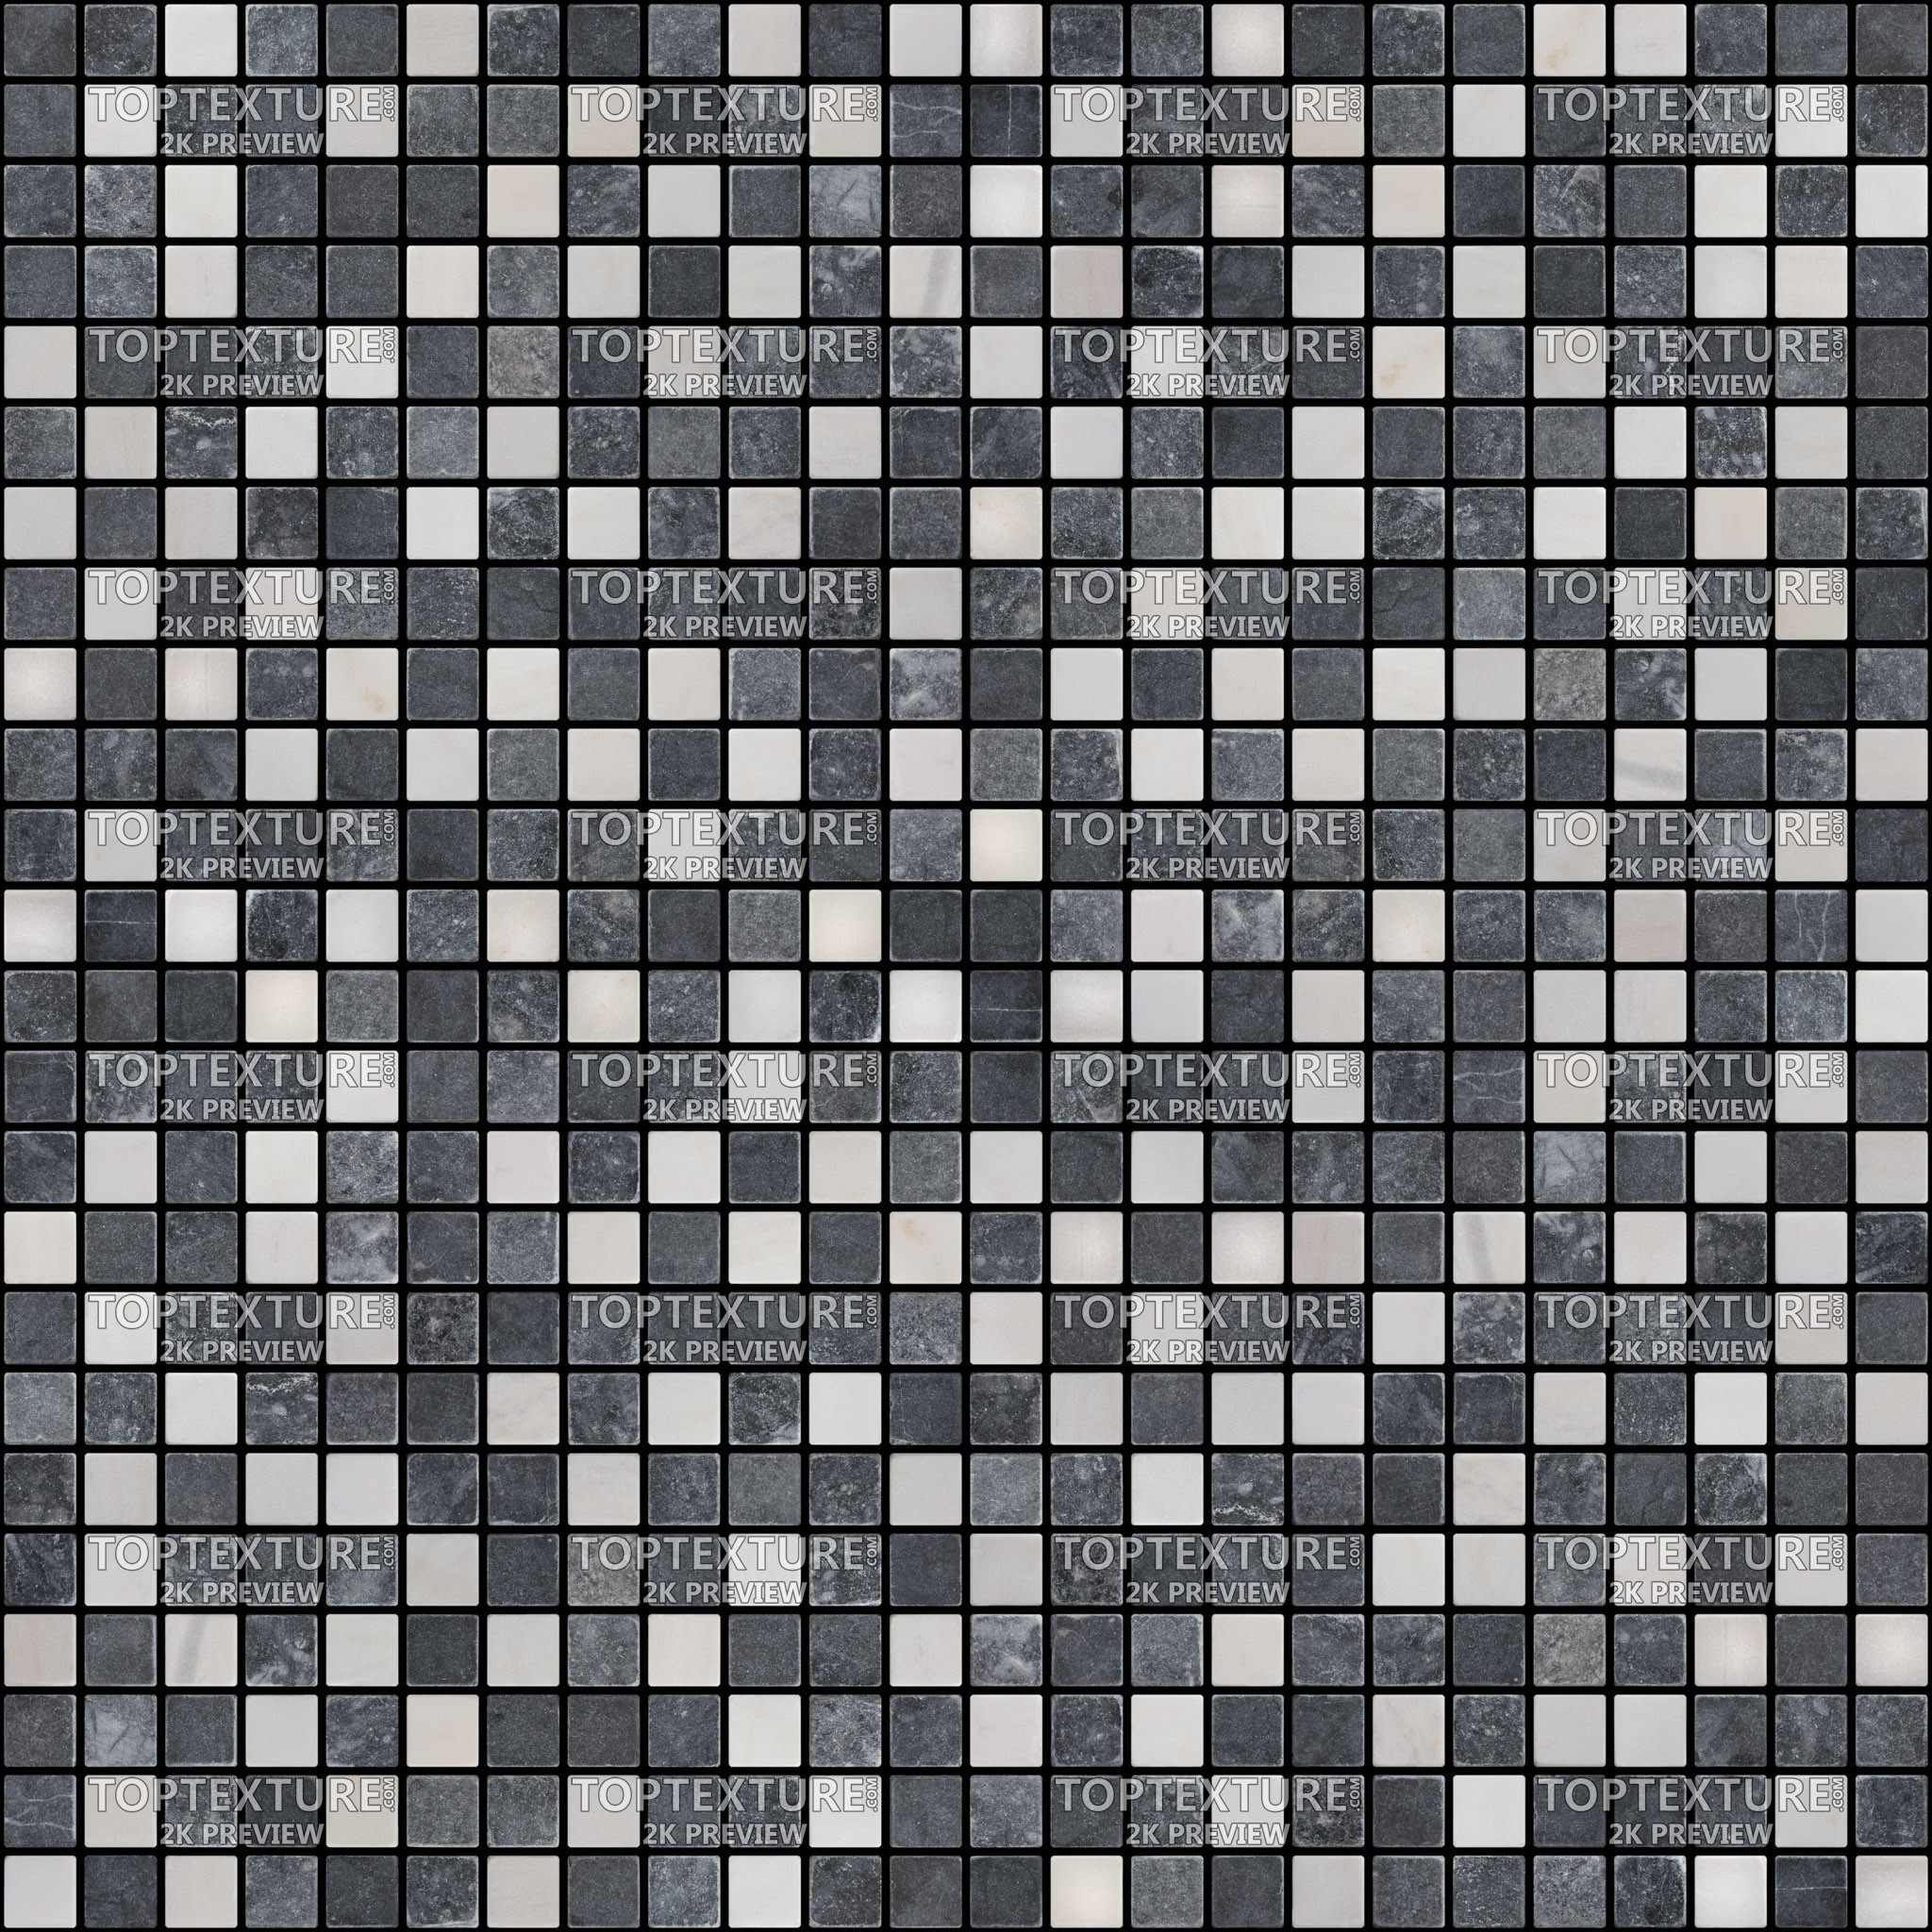 Black and White Small Tiles - 2K preview